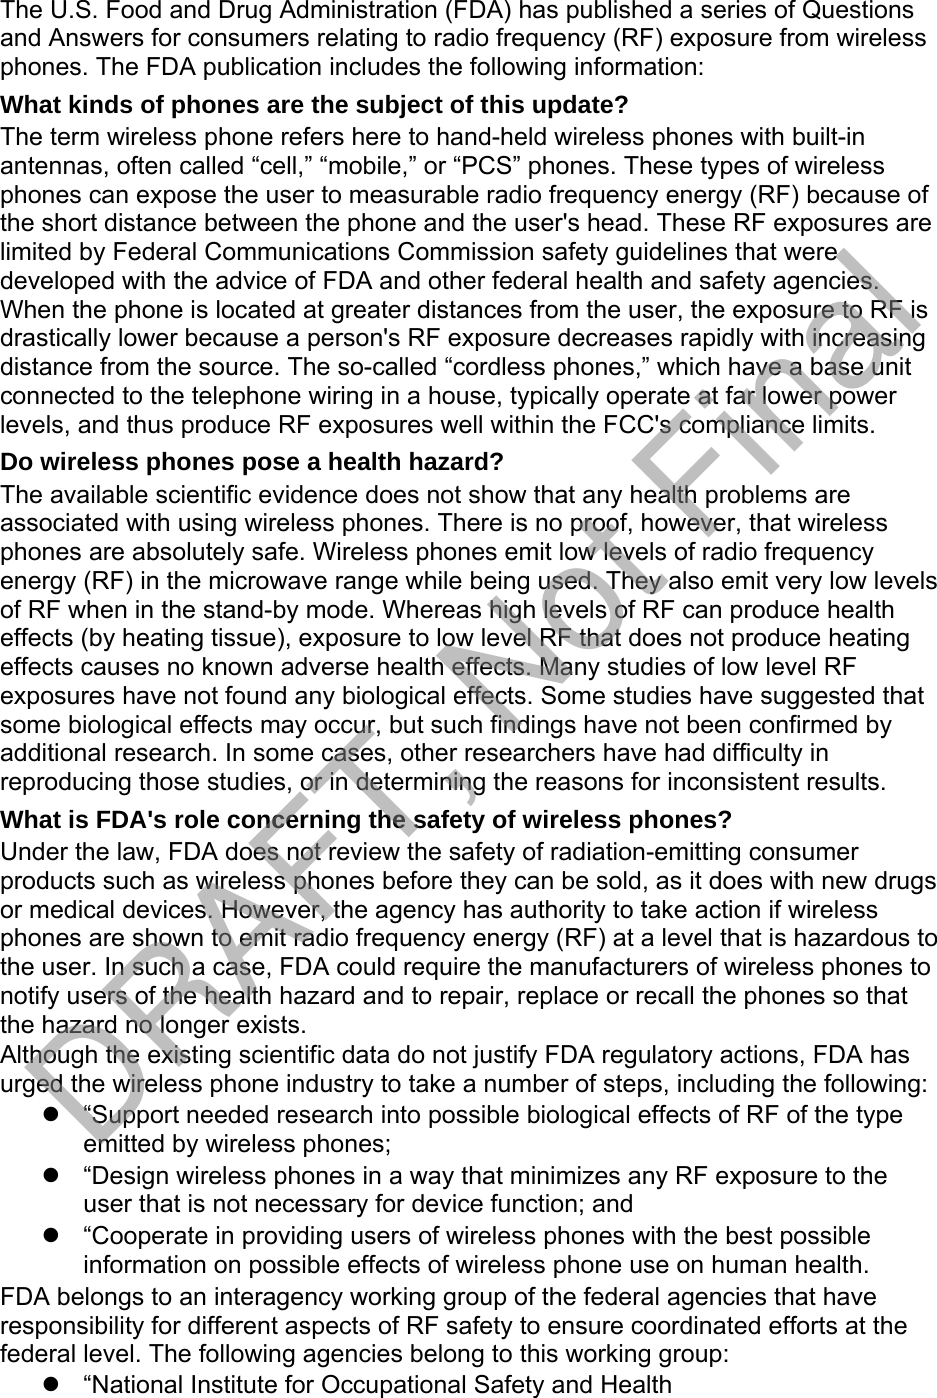 The U.S. Food and Drug Administration (FDA) has published a series of Questions and Answers for consumers relating to radio frequency (RF) exposure from wireless phones. The FDA publication includes the following information: What kinds of phones are the subject of this update? The term wireless phone refers here to hand-held wireless phones with built-in antennas, often called “cell,” “mobile,” or “PCS” phones. These types of wireless phones can expose the user to measurable radio frequency energy (RF) because of the short distance between the phone and the user&apos;s head. These RF exposures are limited by Federal Communications Commission safety guidelines that were developed with the advice of FDA and other federal health and safety agencies. When the phone is located at greater distances from the user, the exposure to RF is drastically lower because a person&apos;s RF exposure decreases rapidly with increasing distance from the source. The so-called “cordless phones,” which have a base unit connected to the telephone wiring in a house, typically operate at far lower power levels, and thus produce RF exposures well within the FCC&apos;s compliance limits. Do wireless phones pose a health hazard? The available scientific evidence does not show that any health problems are associated with using wireless phones. There is no proof, however, that wireless phones are absolutely safe. Wireless phones emit low levels of radio frequency energy (RF) in the microwave range while being used. They also emit very low levels of RF when in the stand-by mode. Whereas high levels of RF can produce health effects (by heating tissue), exposure to low level RF that does not produce heating effects causes no known adverse health effects. Many studies of low level RF exposures have not found any biological effects. Some studies have suggested that some biological effects may occur, but such findings have not been confirmed by additional research. In some cases, other researchers have had difficulty in reproducing those studies, or in determining the reasons for inconsistent results. What is FDA&apos;s role concerning the safety of wireless phones? Under the law, FDA does not review the safety of radiation-emitting consumer products such as wireless phones before they can be sold, as it does with new drugs or medical devices. However, the agency has authority to take action if wireless phones are shown to emit radio frequency energy (RF) at a level that is hazardous to the user. In such a case, FDA could require the manufacturers of wireless phones to notify users of the health hazard and to repair, replace or recall the phones so that the hazard no longer exists. Although the existing scientific data do not justify FDA regulatory actions, FDA has urged the wireless phone industry to take a number of steps, including the following: “Support needed research into possible biological effects of RF of the typeemitted by wireless phones;“Design wireless phones in a way that minimizes any RF exposure to theuser that is not necessary for device function; and“Cooperate in providing users of wireless phones with the best possibleinformation on possible effects of wireless phone use on human health.FDA belongs to an interagency working group of the federal agencies that have responsibility for different aspects of RF safety to ensure coordinated efforts at the federal level. The following agencies belong to this working group: “National Institute for Occupational Safety and HealthDRAFT, Not Final